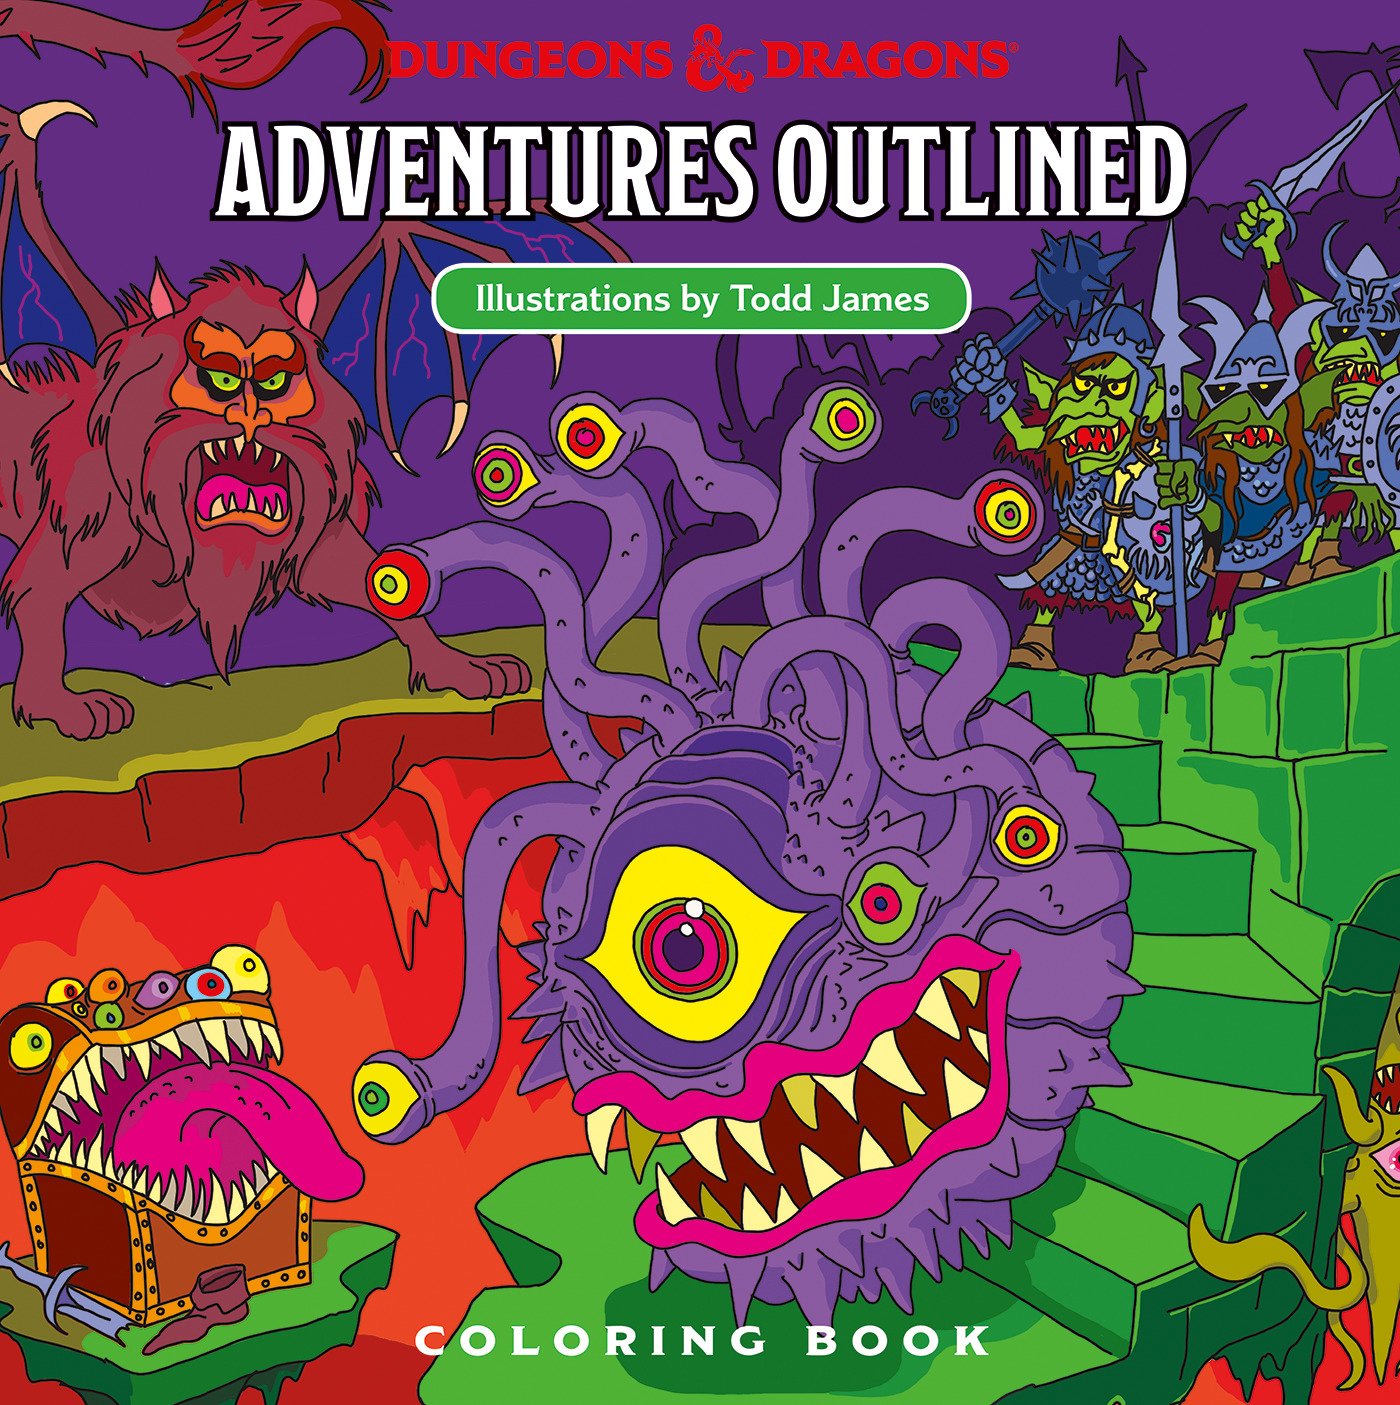 Dungeons & Dragons Adventures Outlined Coloring Book | Kessel Run Games Inc. 